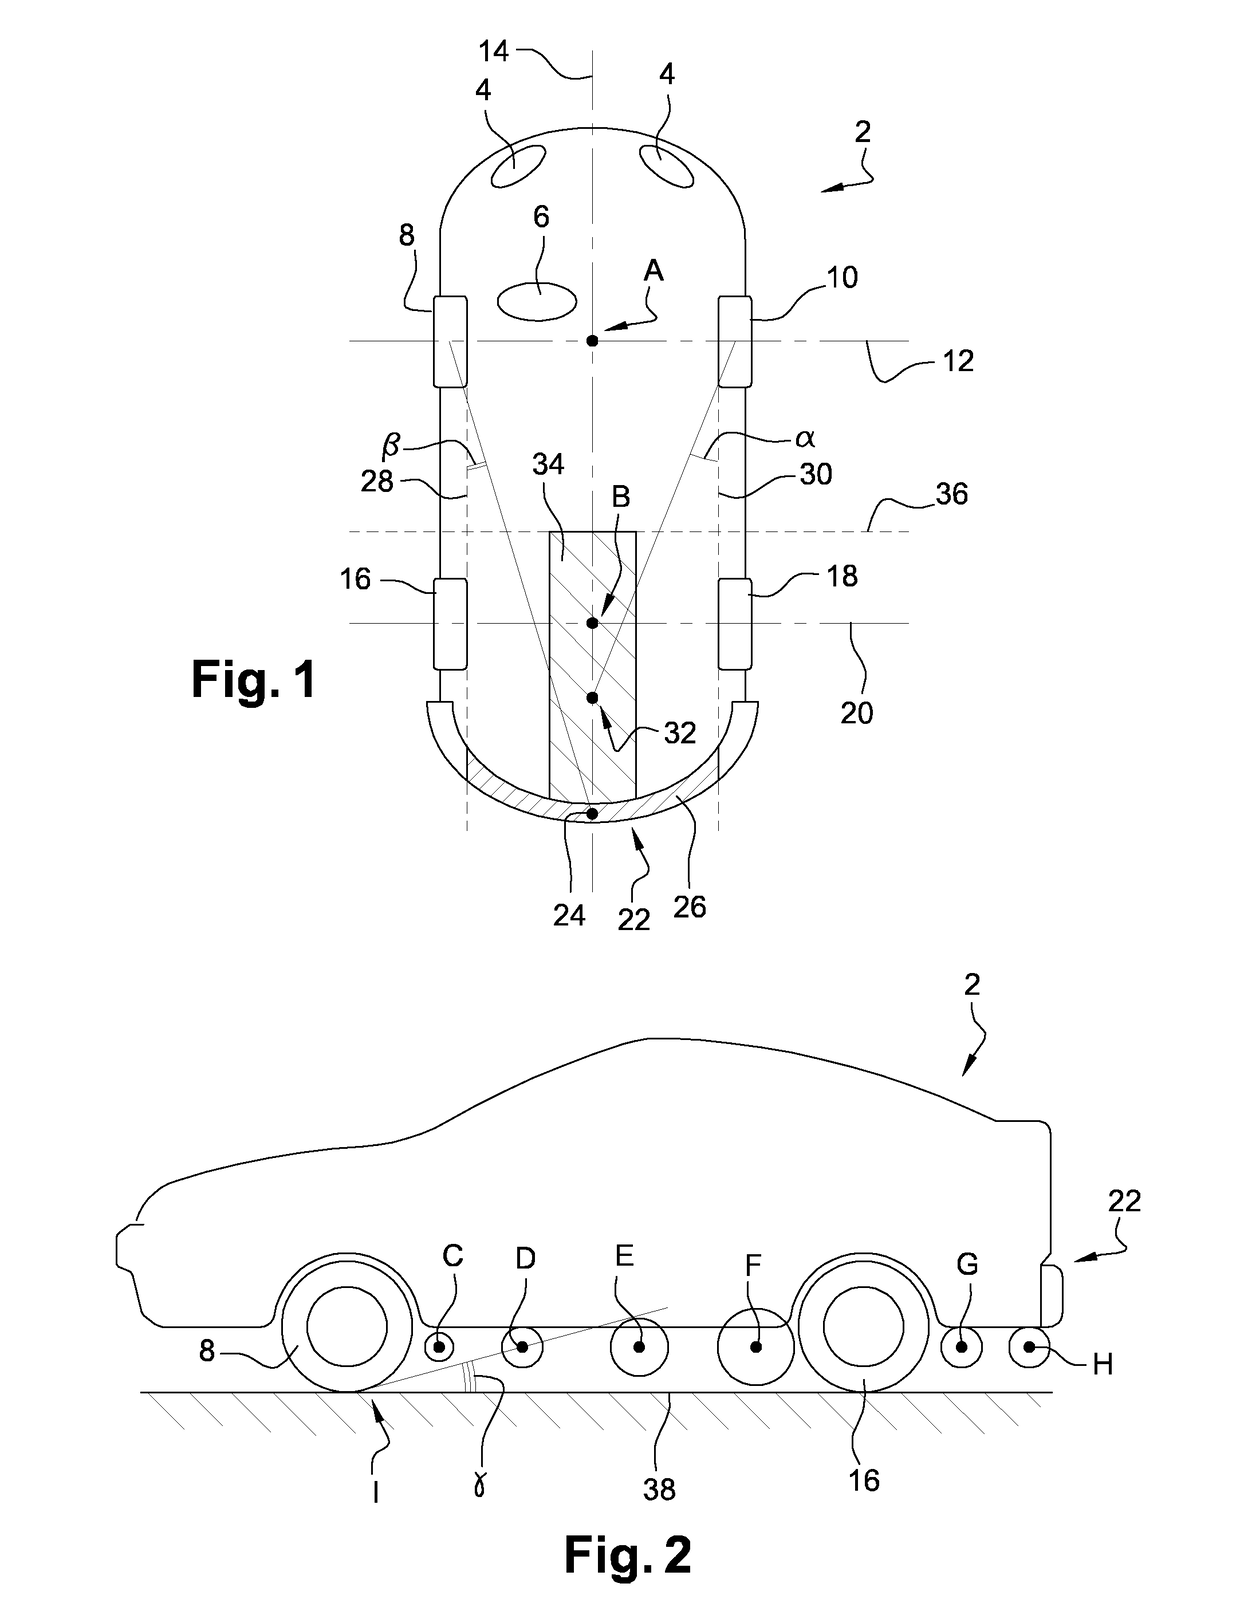 Vehicle comprising means for detecting noise generated by a tyre